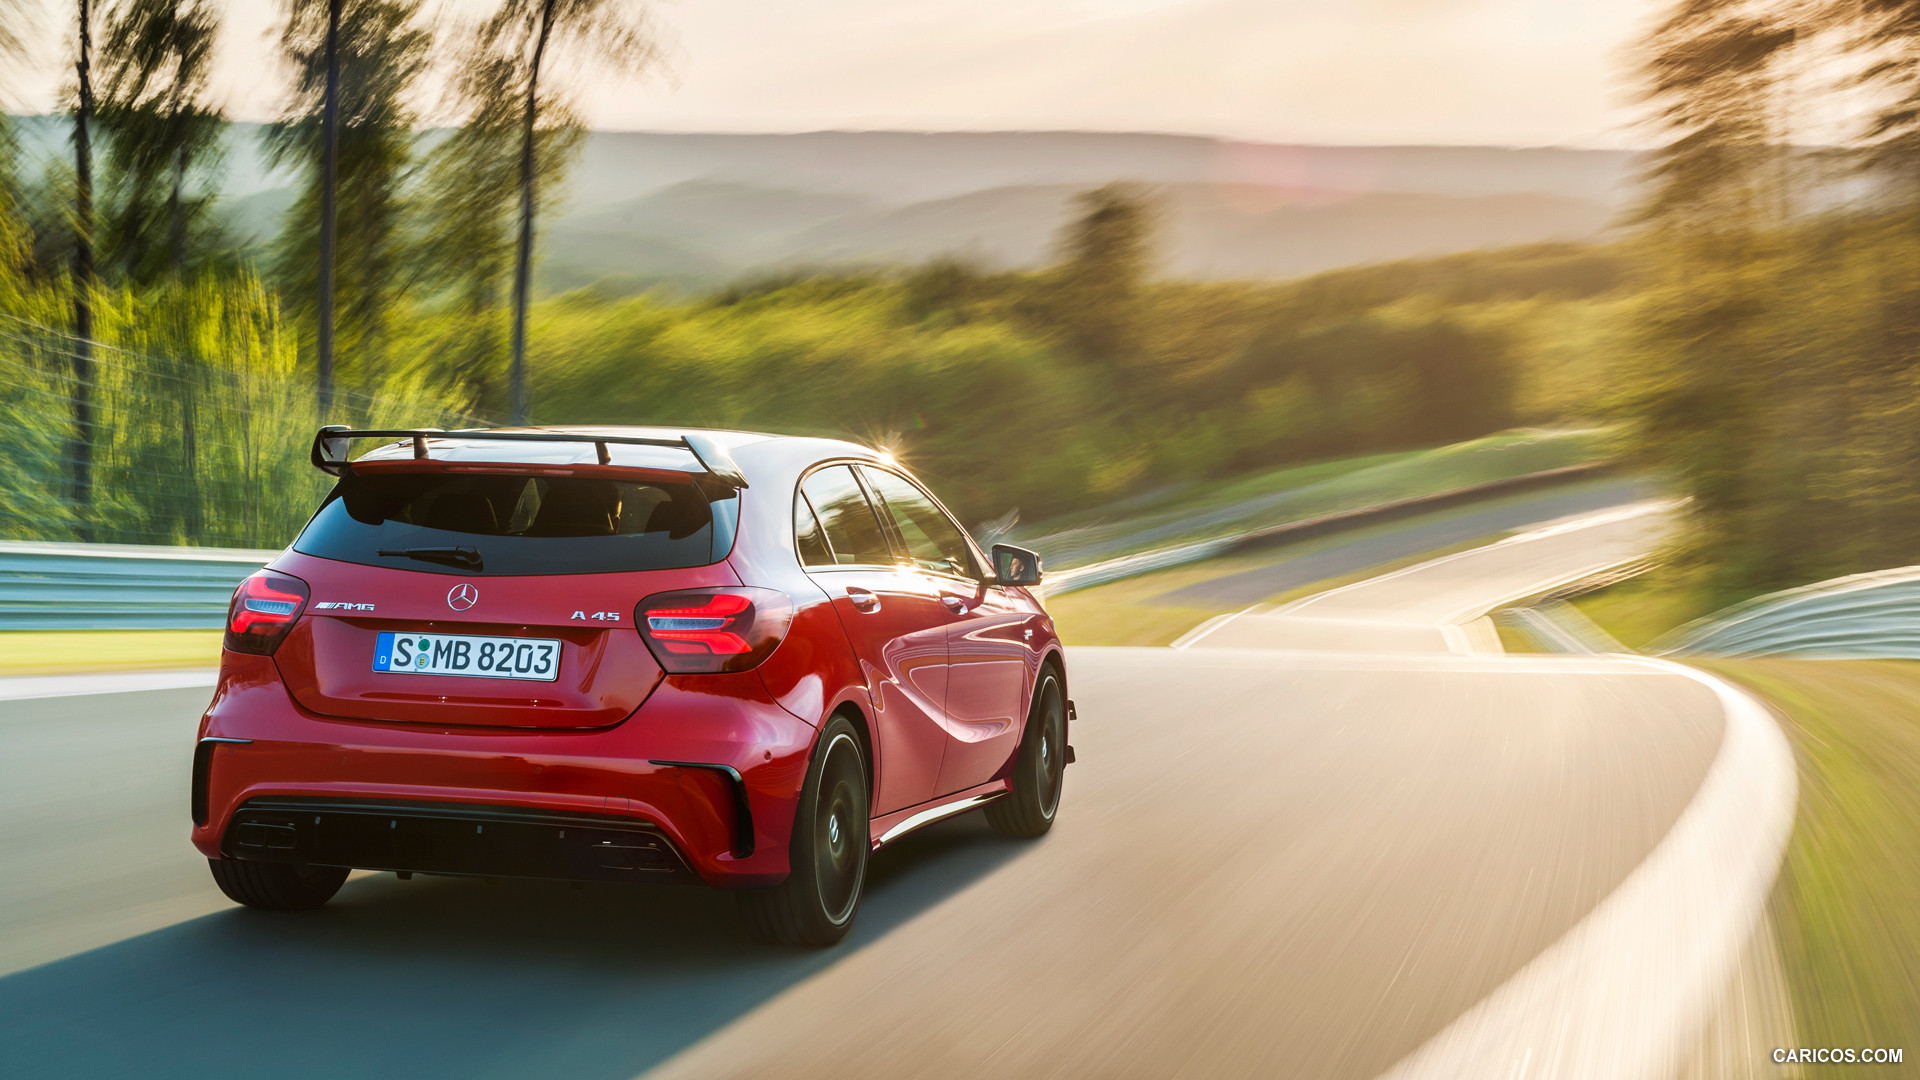 2016 Mercedes-AMG A45 AMG Exclusive (Jupiter Red) - Rear, #14 of 15